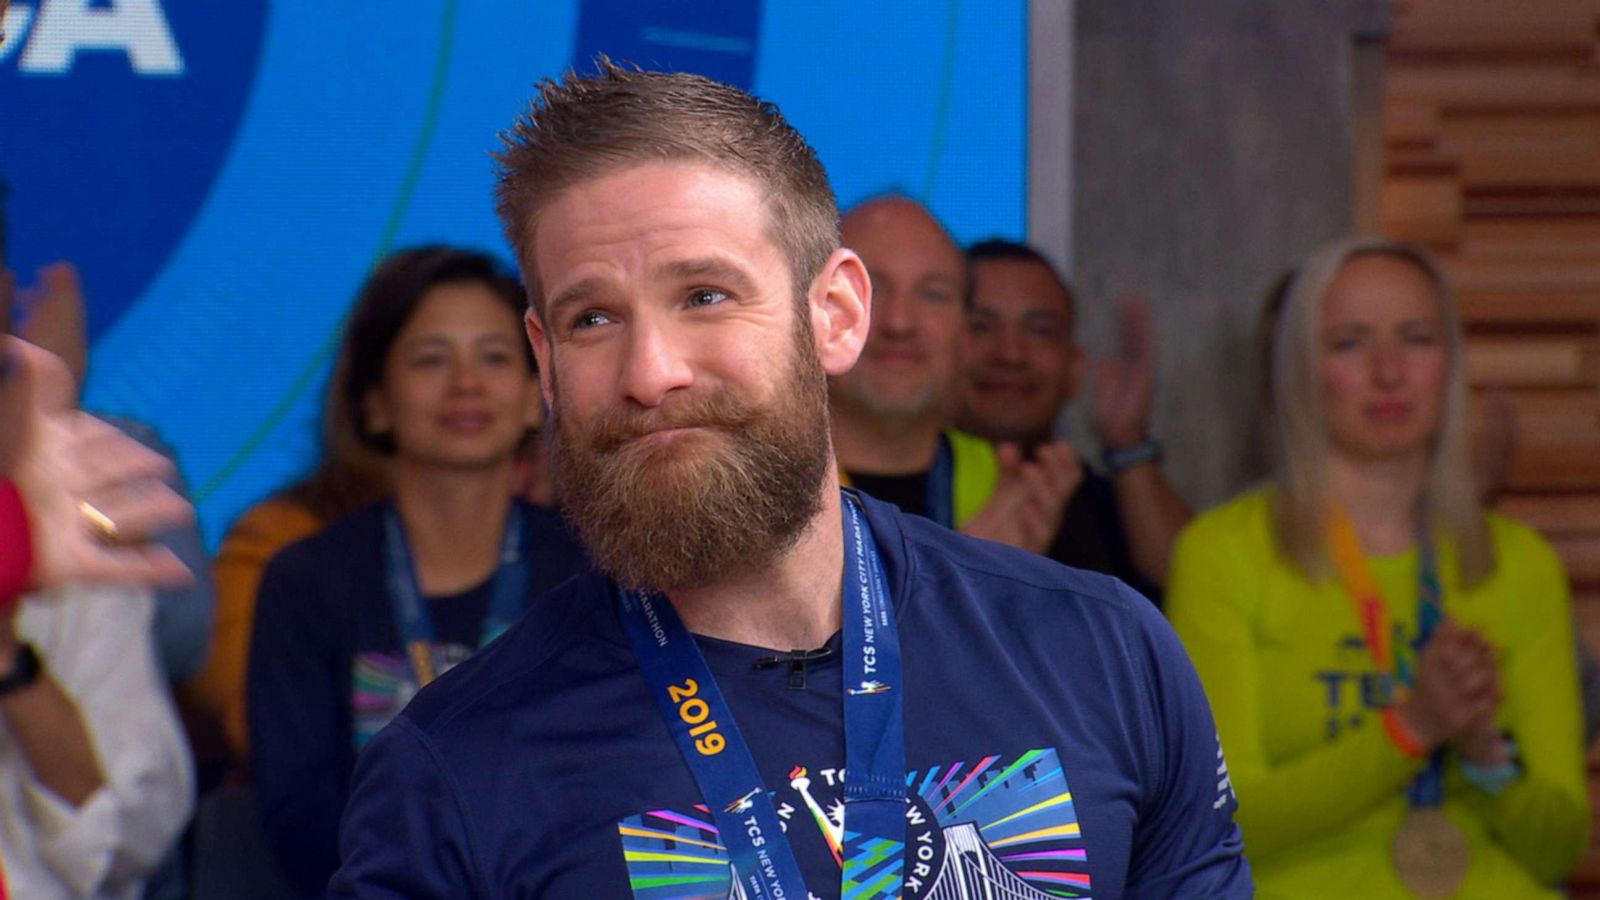 PHOTO: Micah Herndon appears on "Good Morning America," Nov. 4, 2019 after completing the New York City Marathon on Nov. 3, 2019.